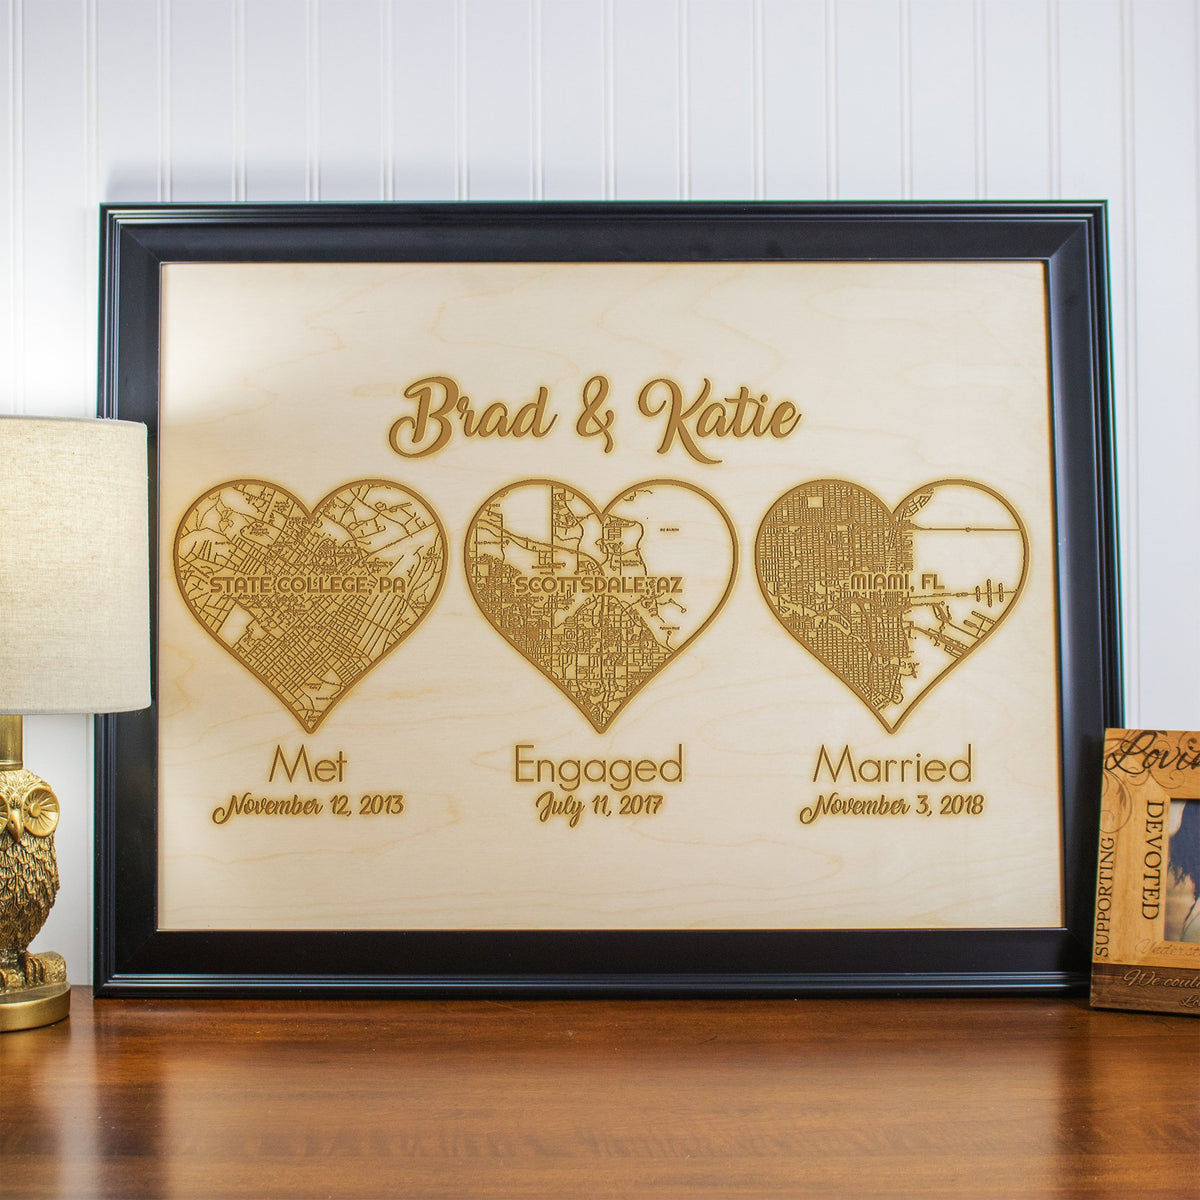 Met Engaged Married/Where It All Began Wooden Framed Wall Art